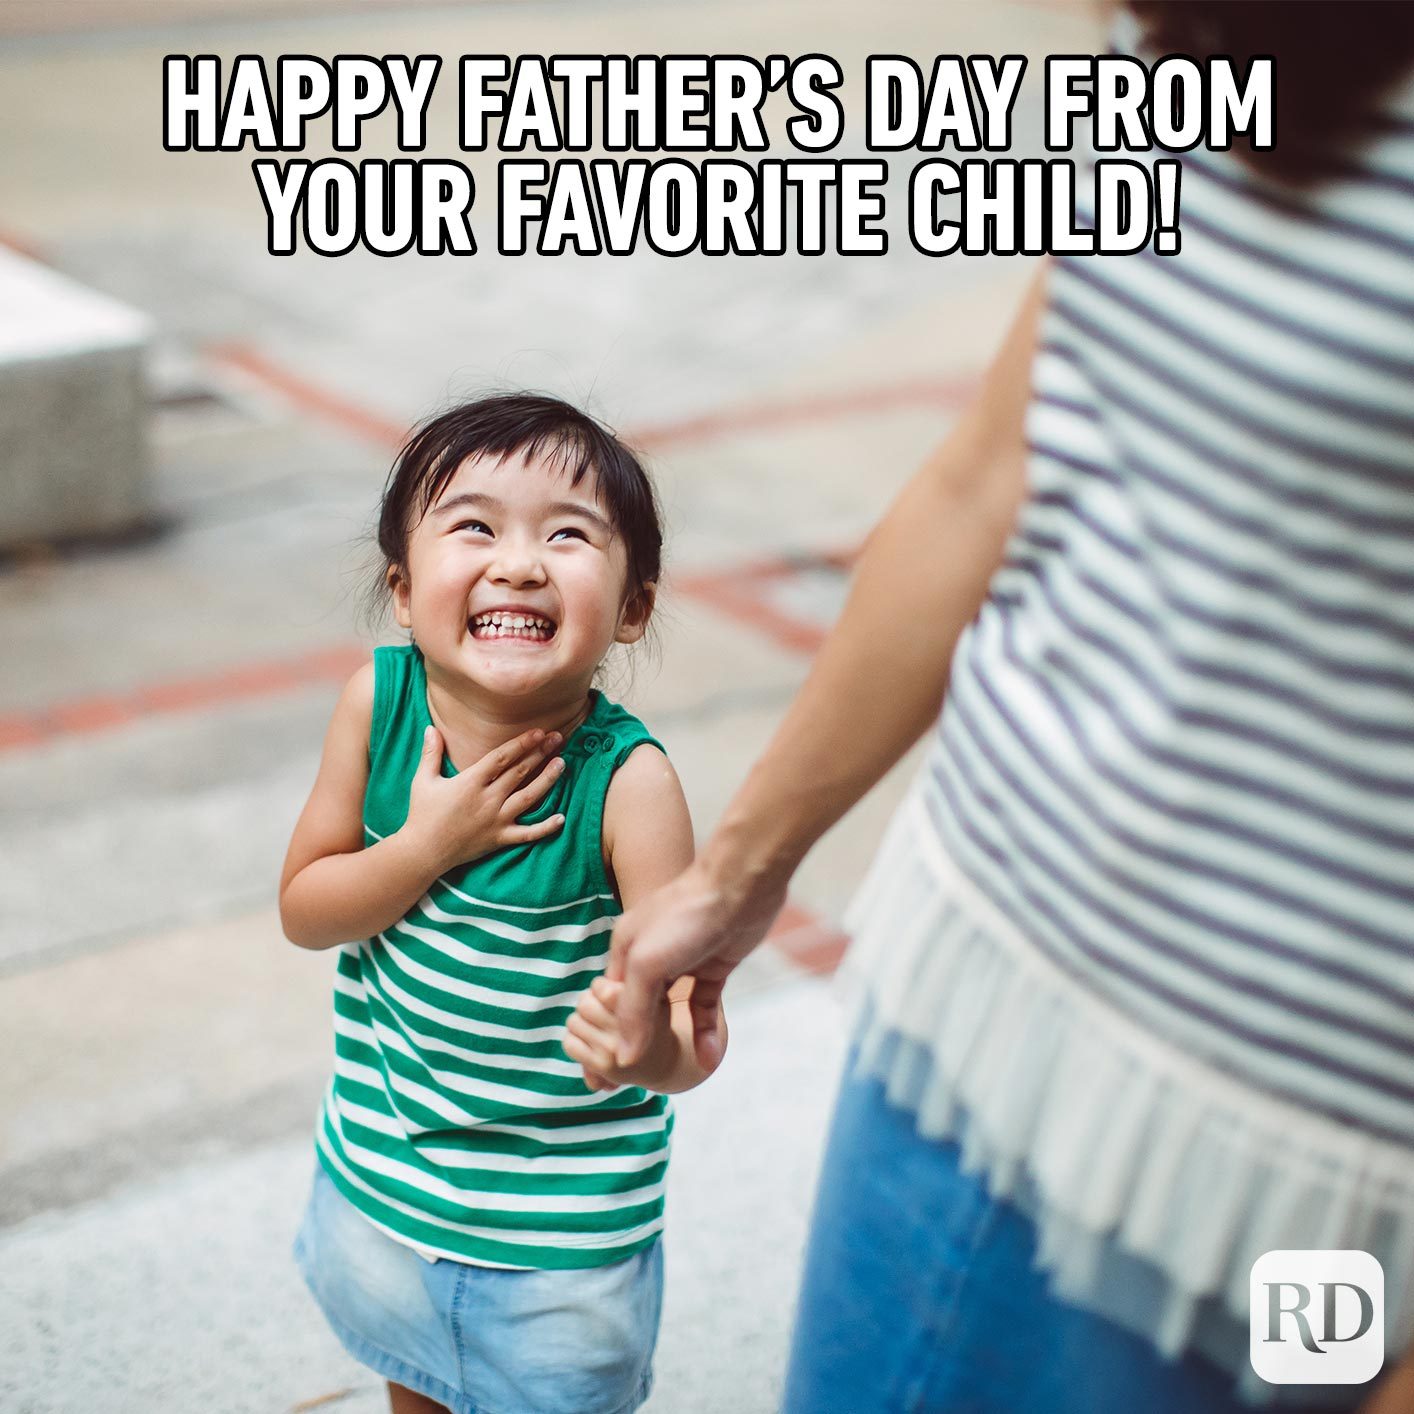 20 Funniest Father's Day Memes to Send Dad in 2022